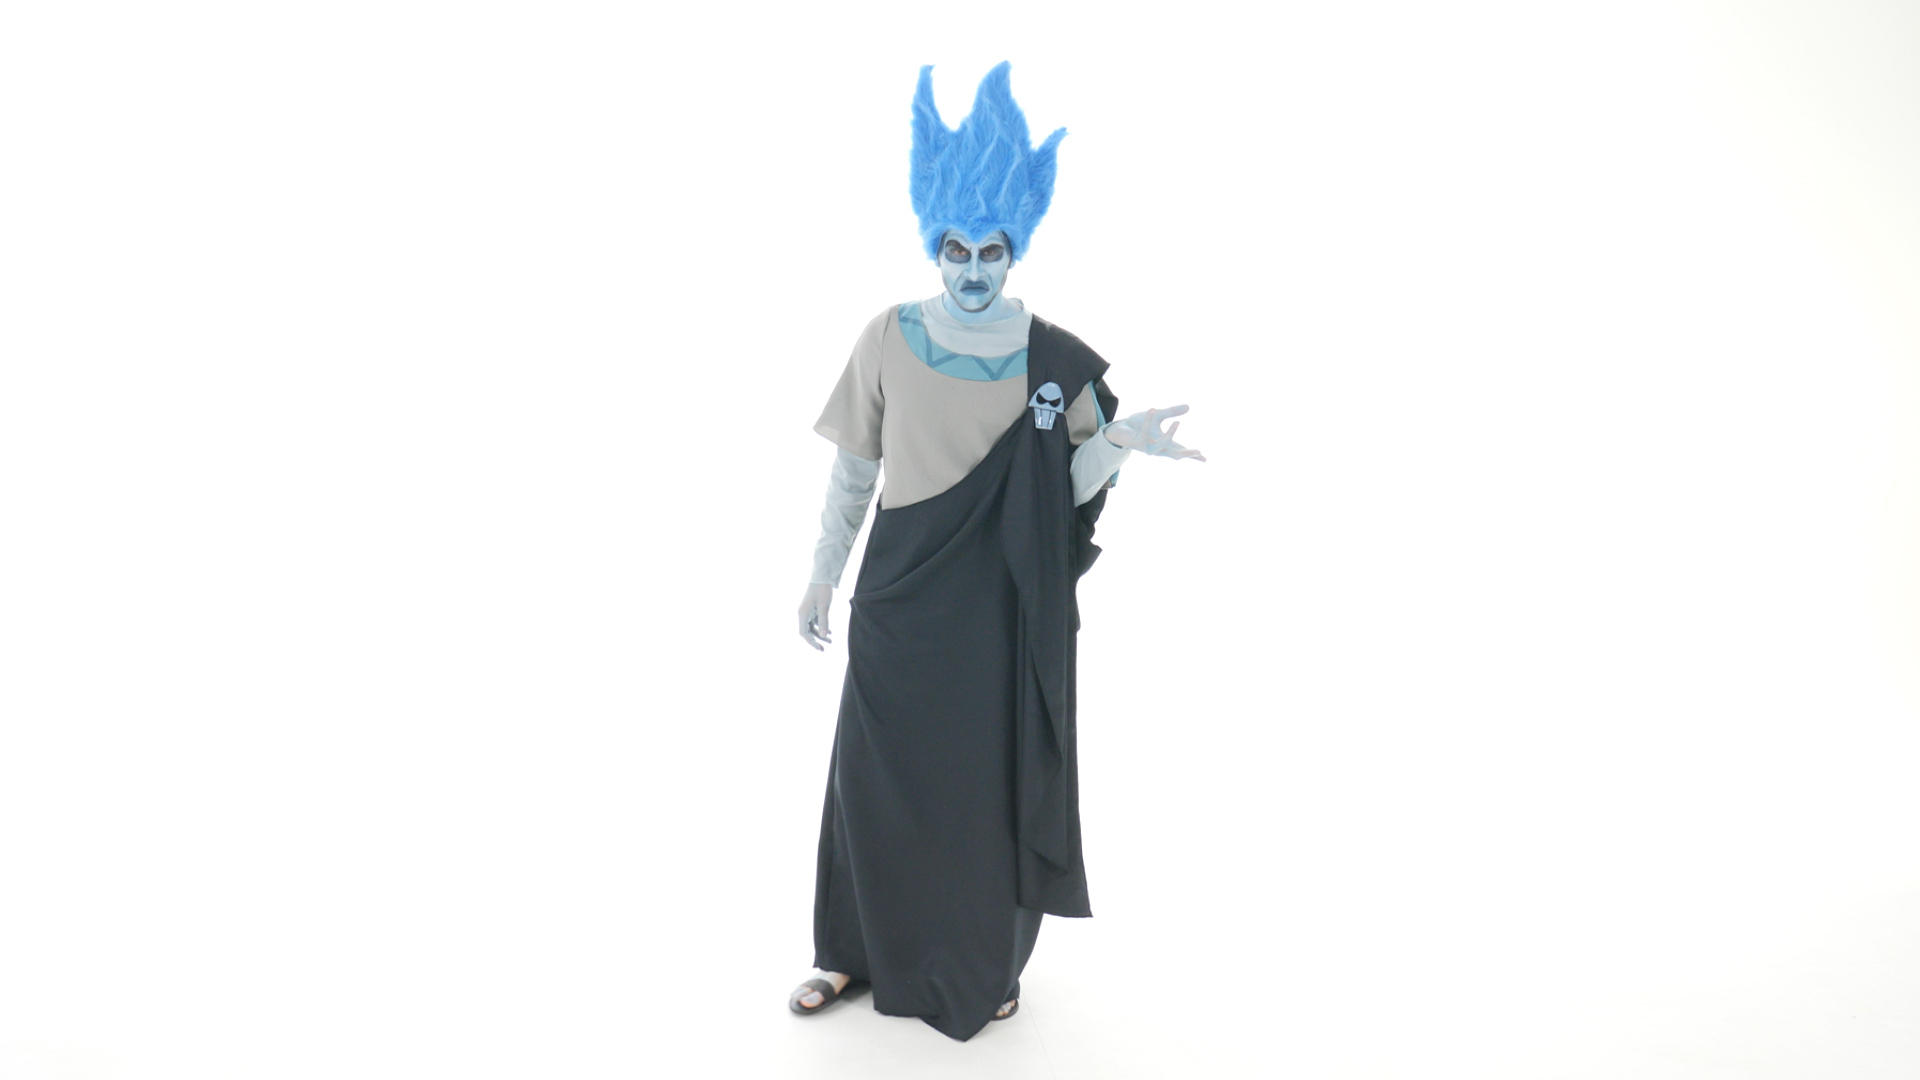 Dress up as everyone's favorite fire-haired antagonist with the Hercules Disney Adult Hades Costume.